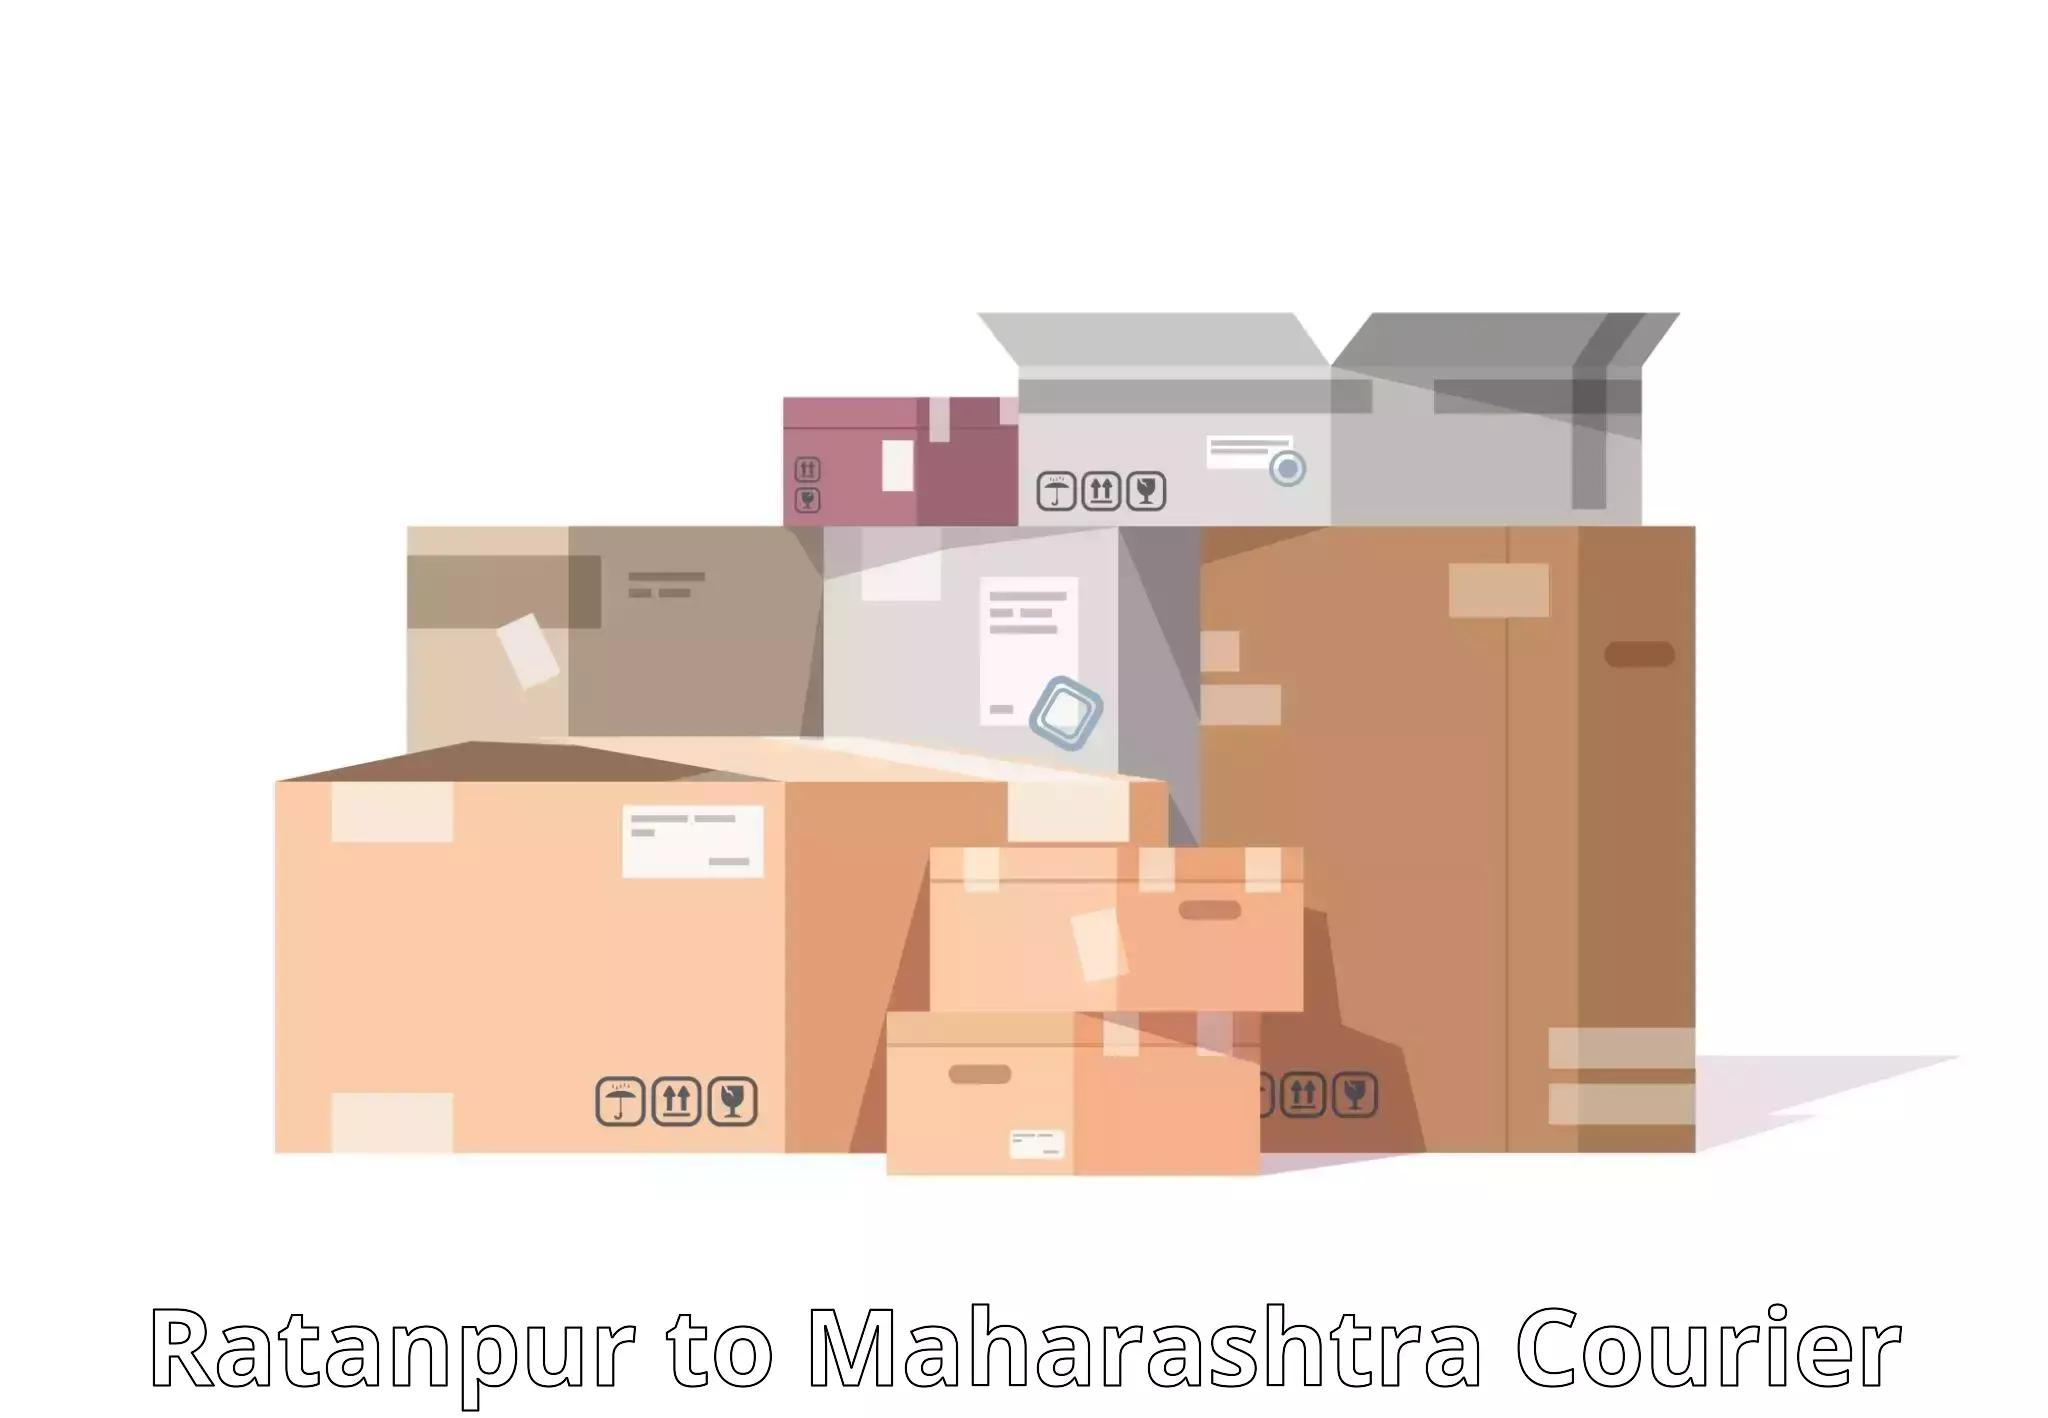 Fast shipping solutions Ratanpur to Koregaon